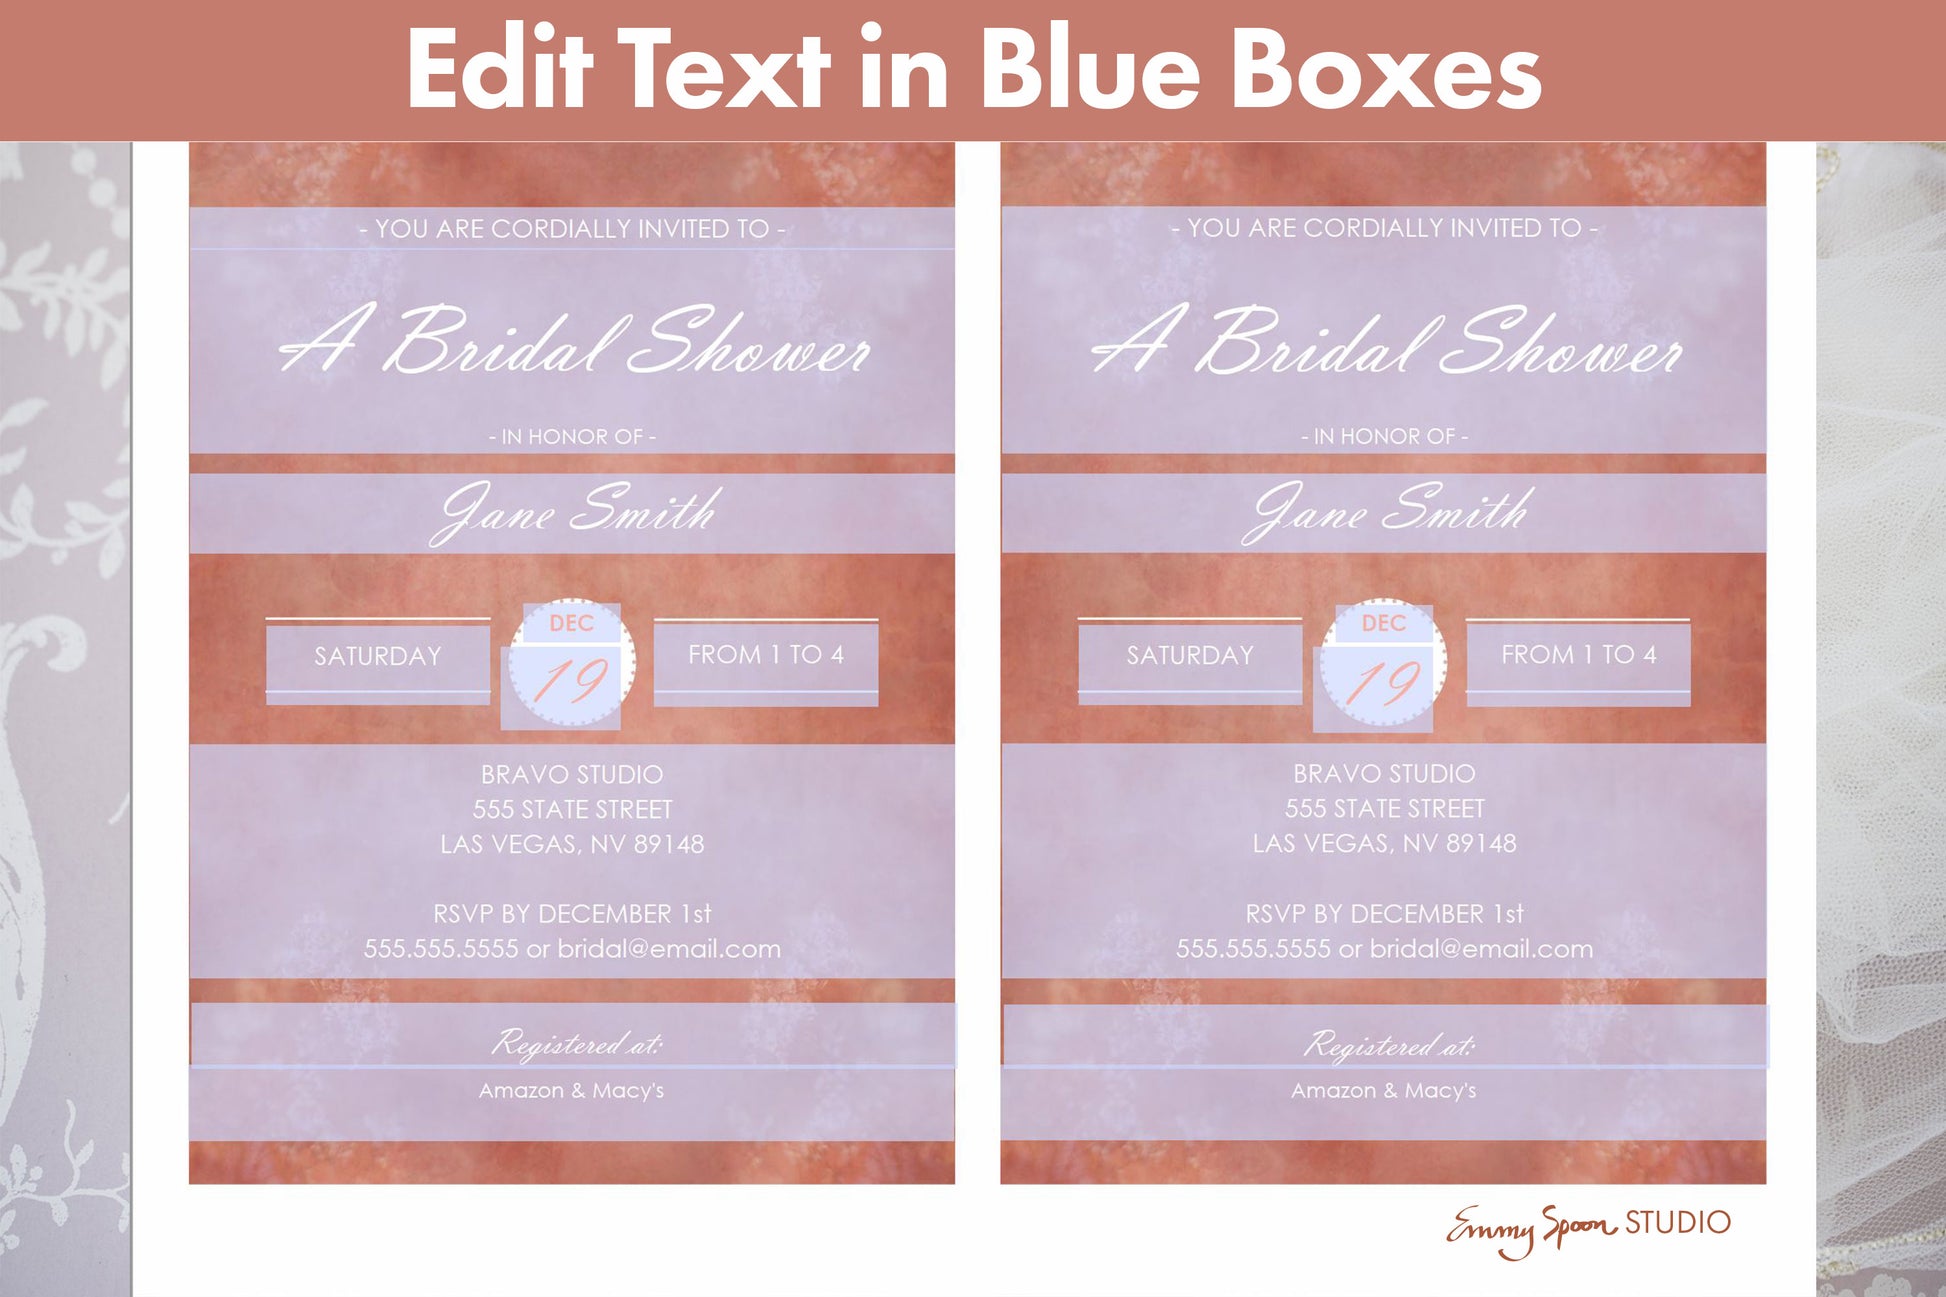 Edit Text in Blue Boxes.